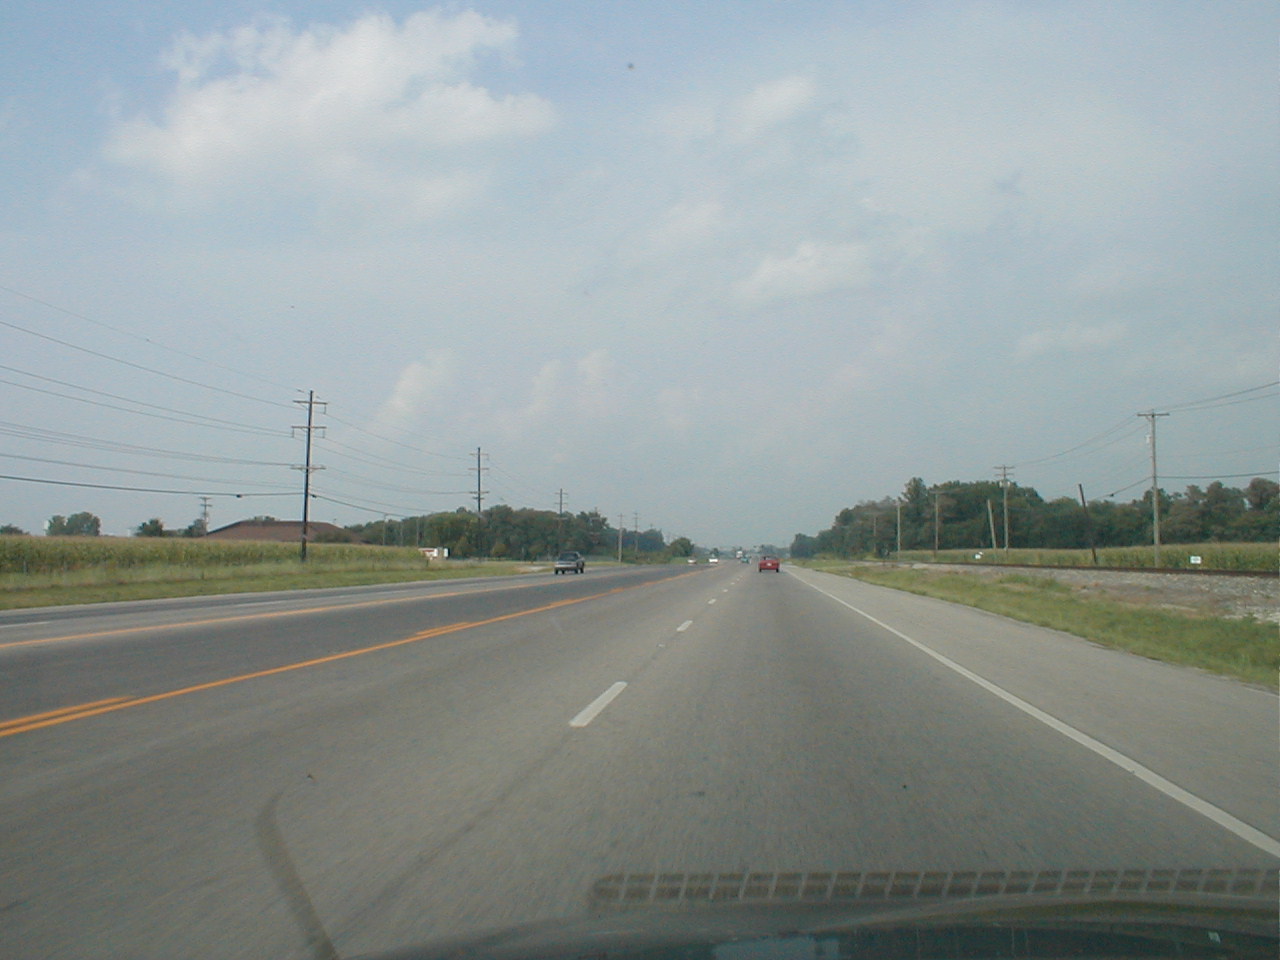 The new four lane section of US 60 east of Owensboro.